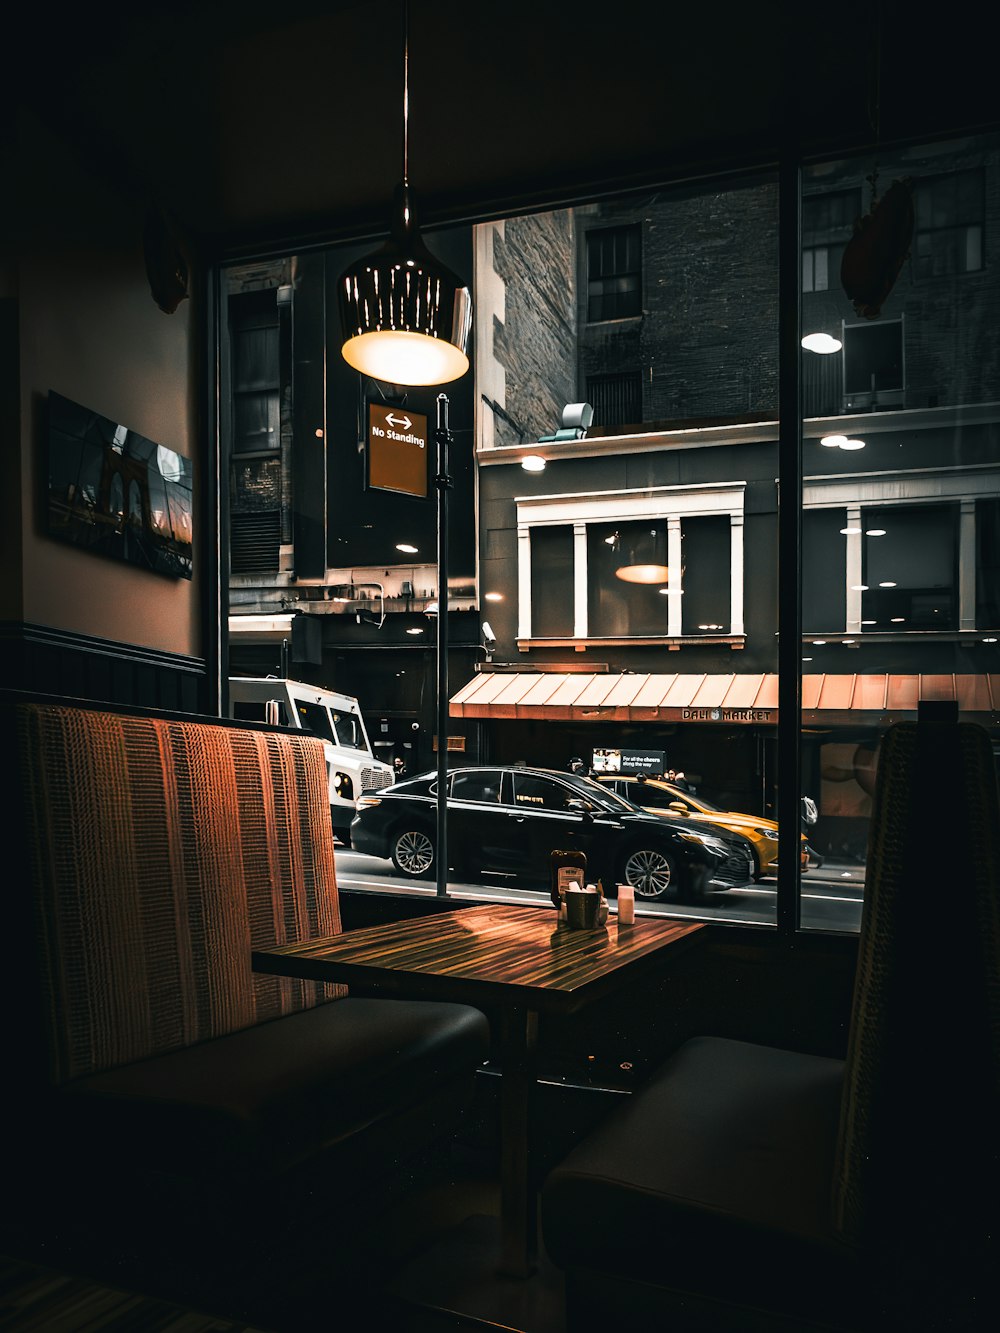 a view of a restaurant through a window at night